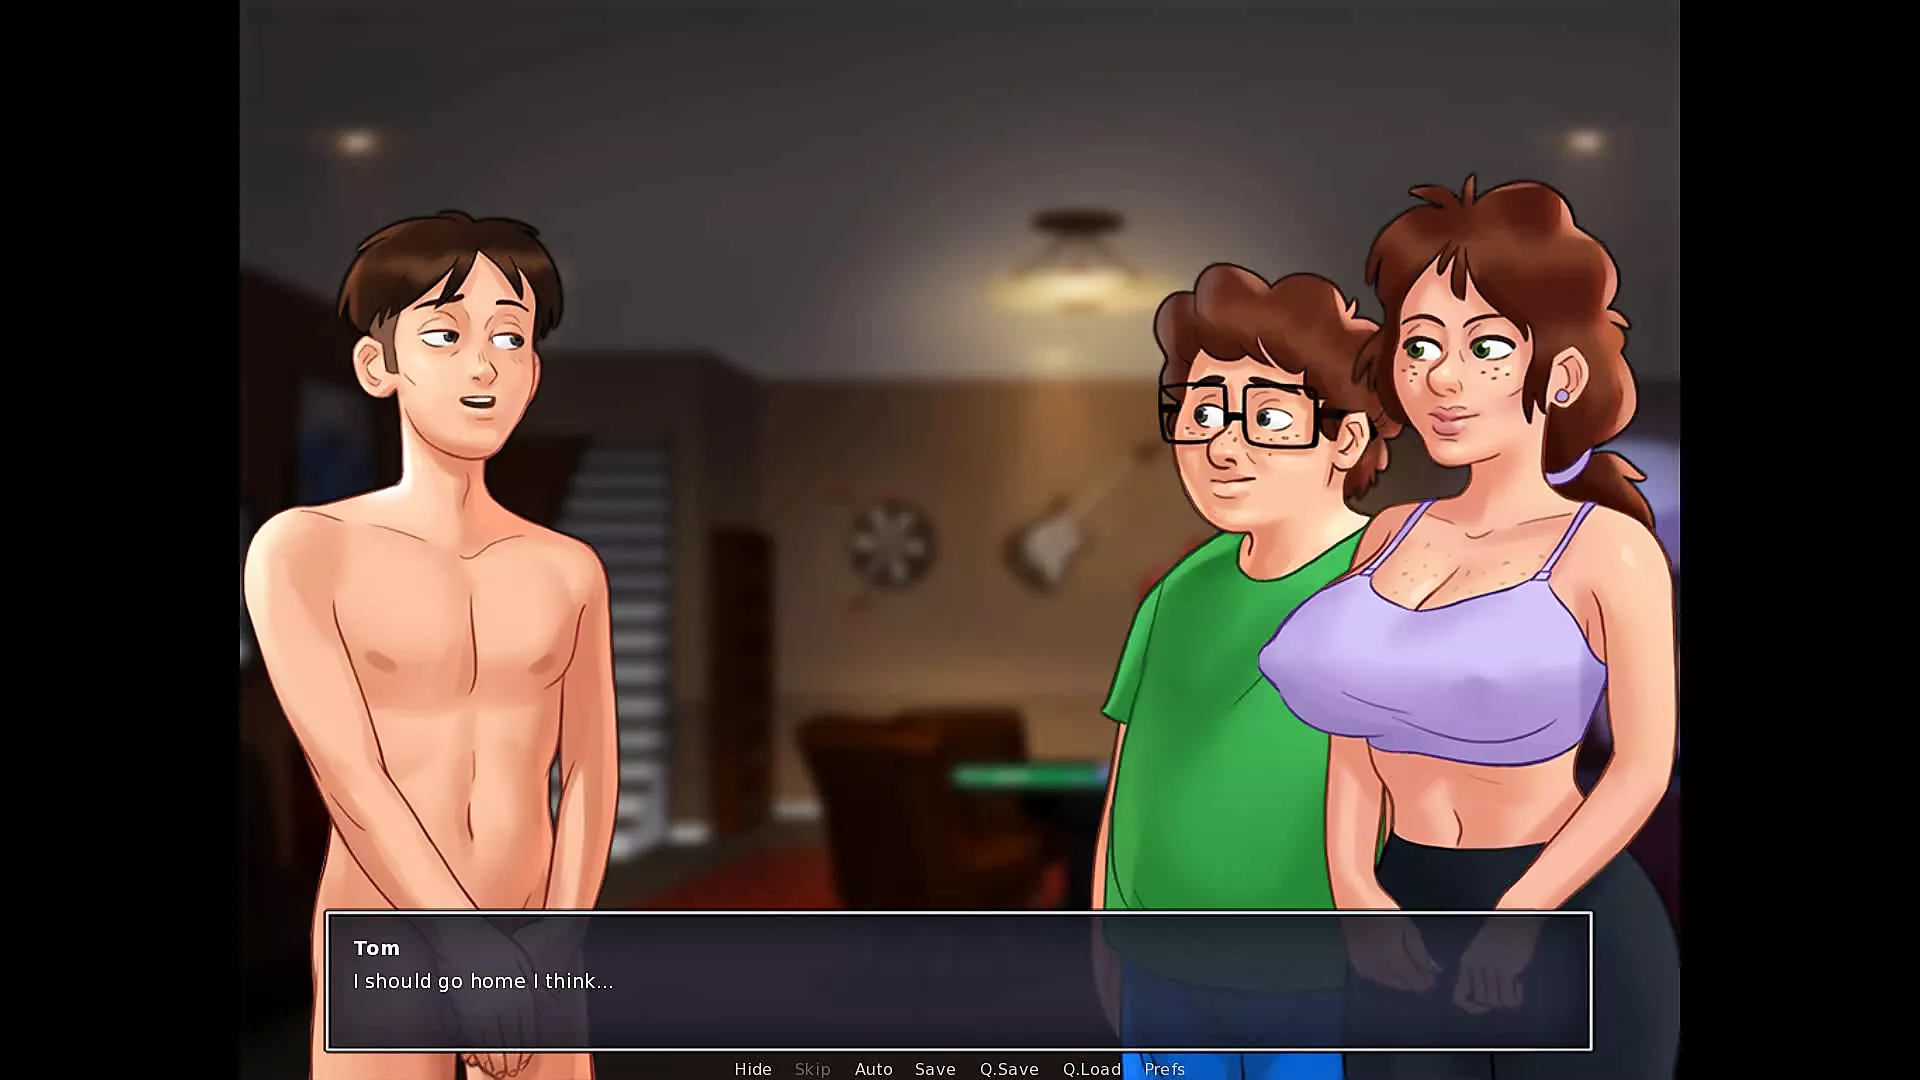 Summertime Saga Playing Strip Poker With The MILF picture image